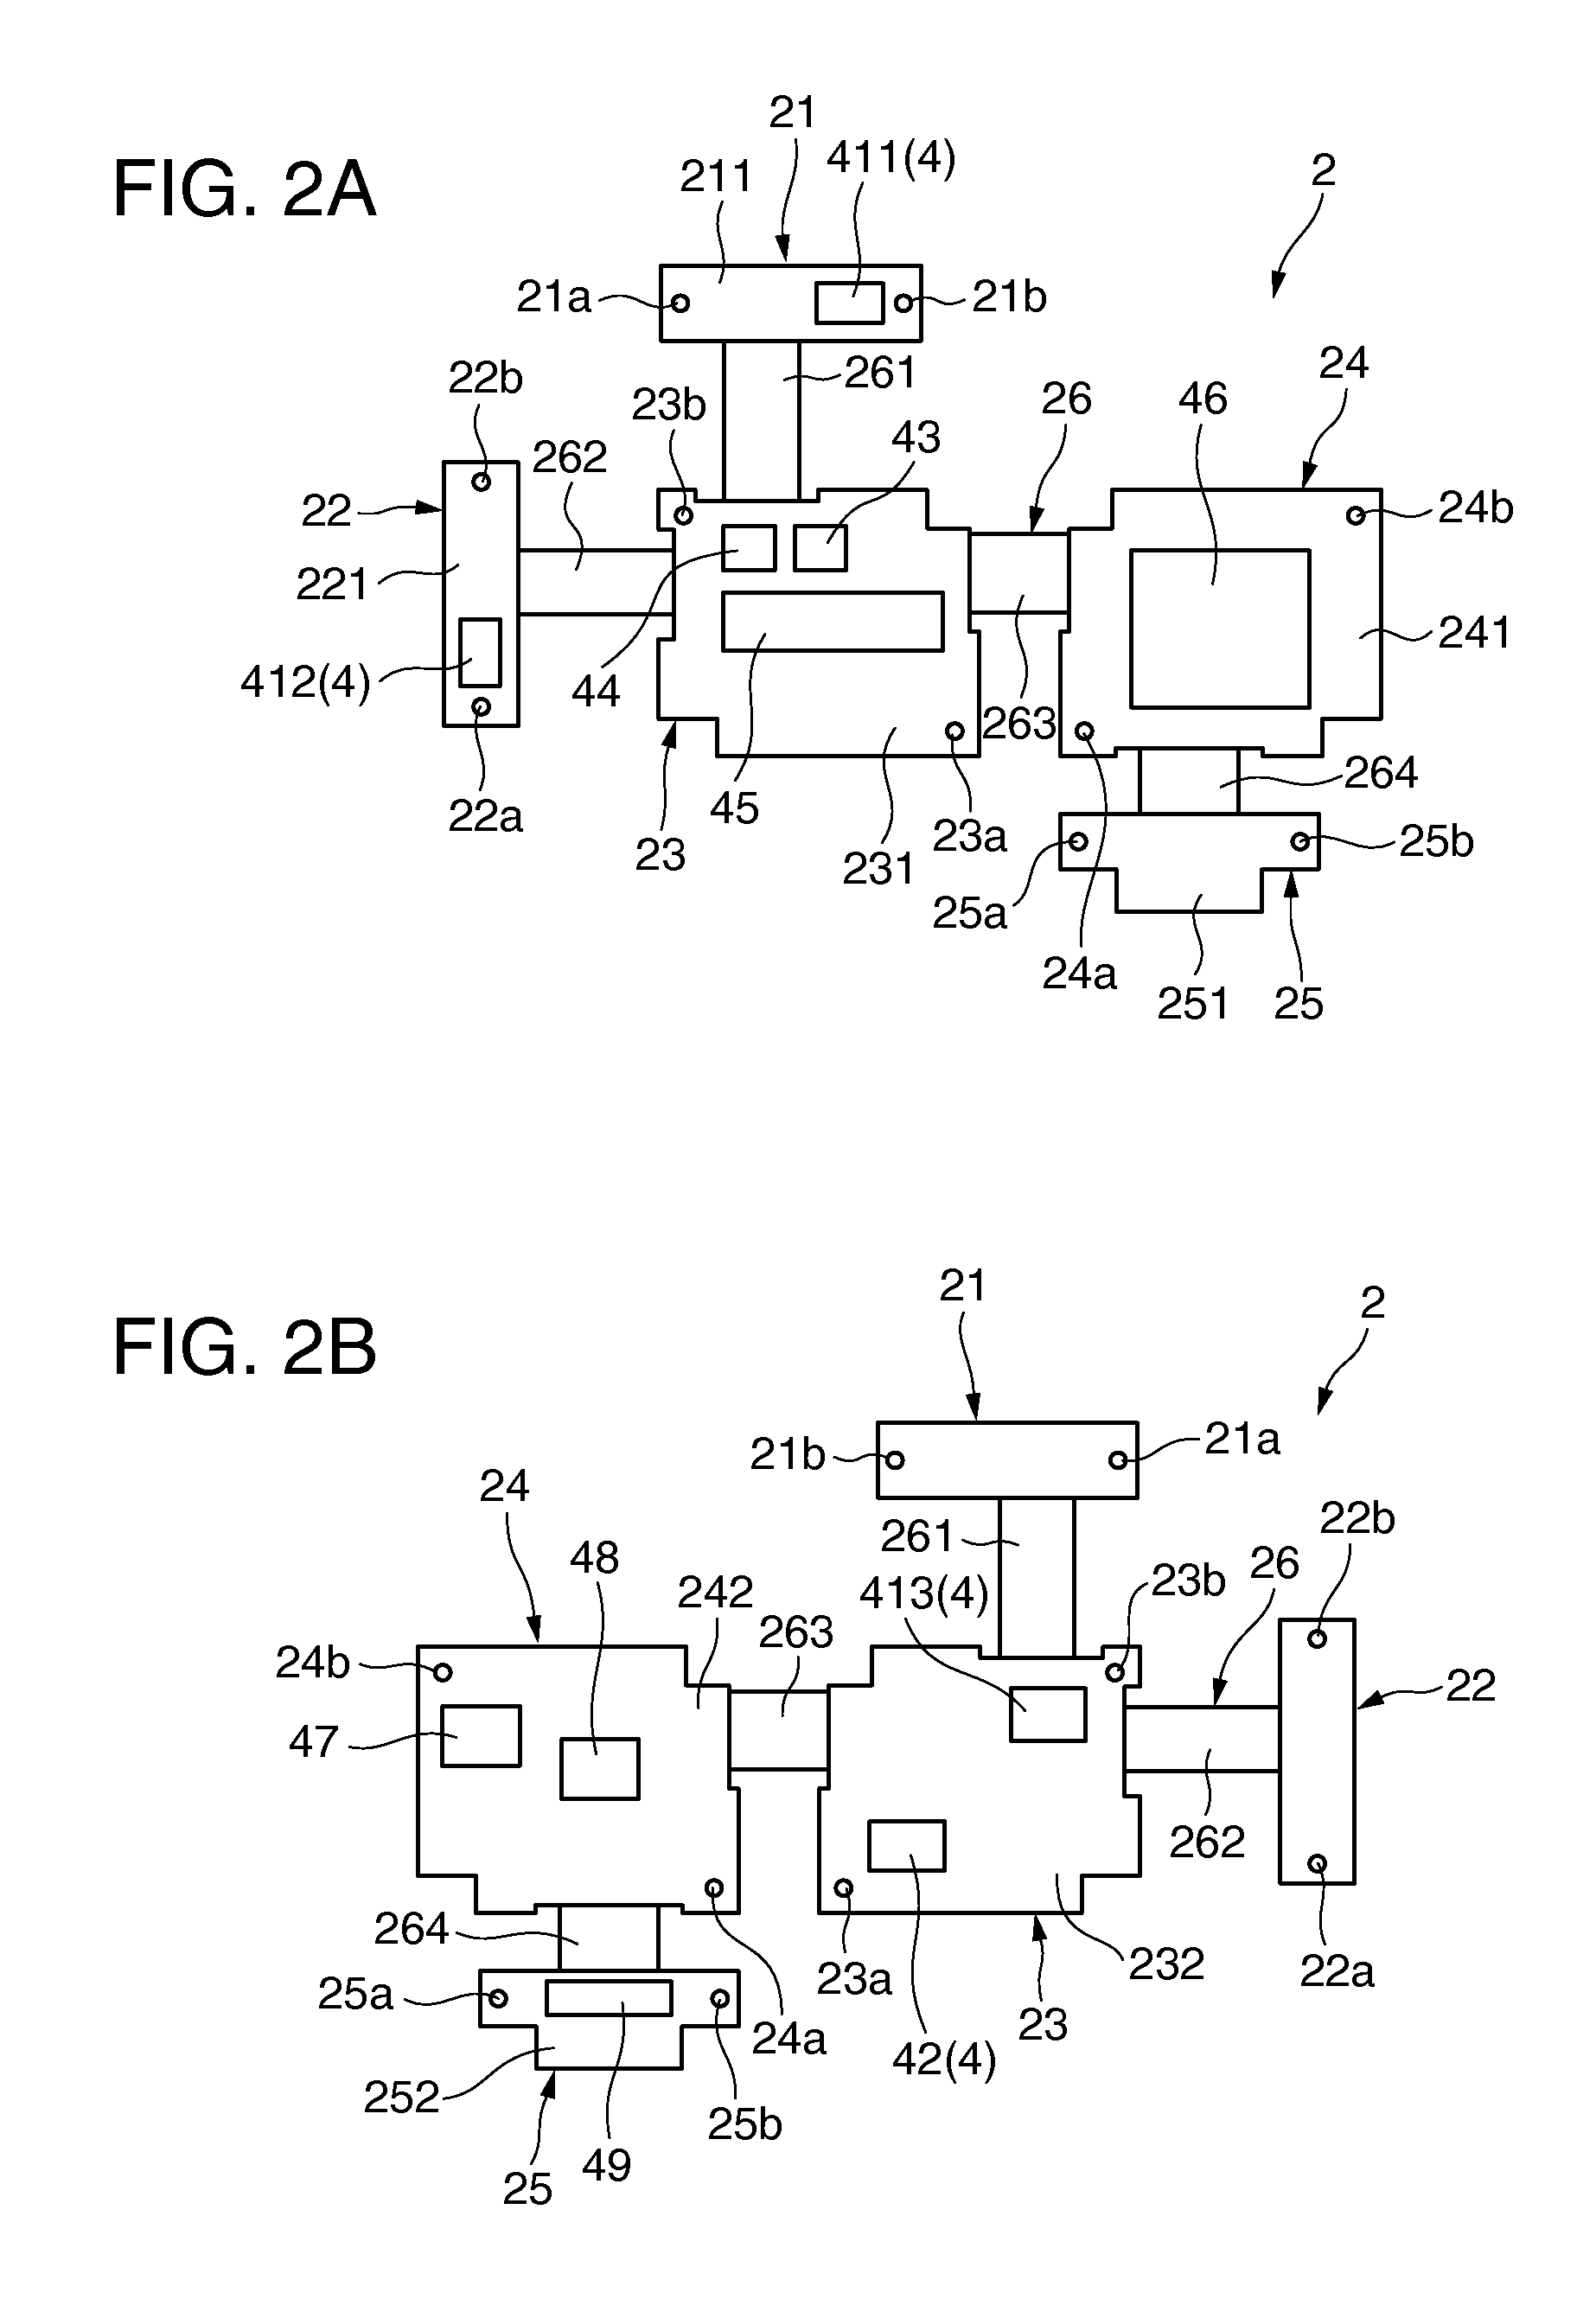 Maintaining member, module, and electronic apparatus